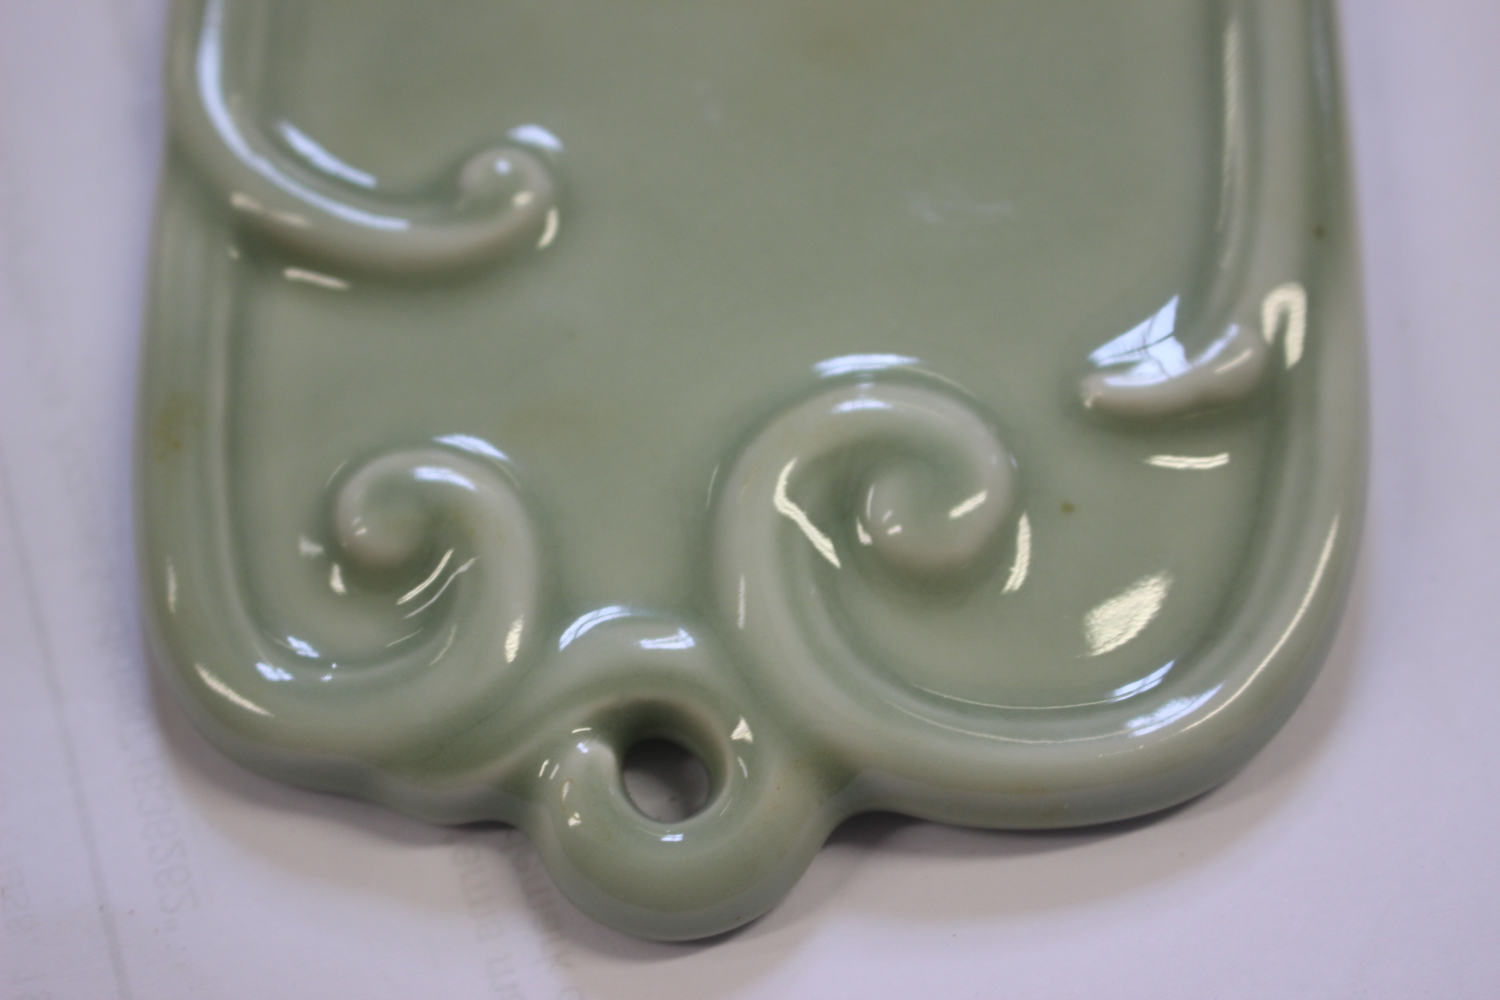 Three Chinese porcelain tea bowls, a turned hardstone tea bowl and a celadon glazed wall plaque, - Image 10 of 13